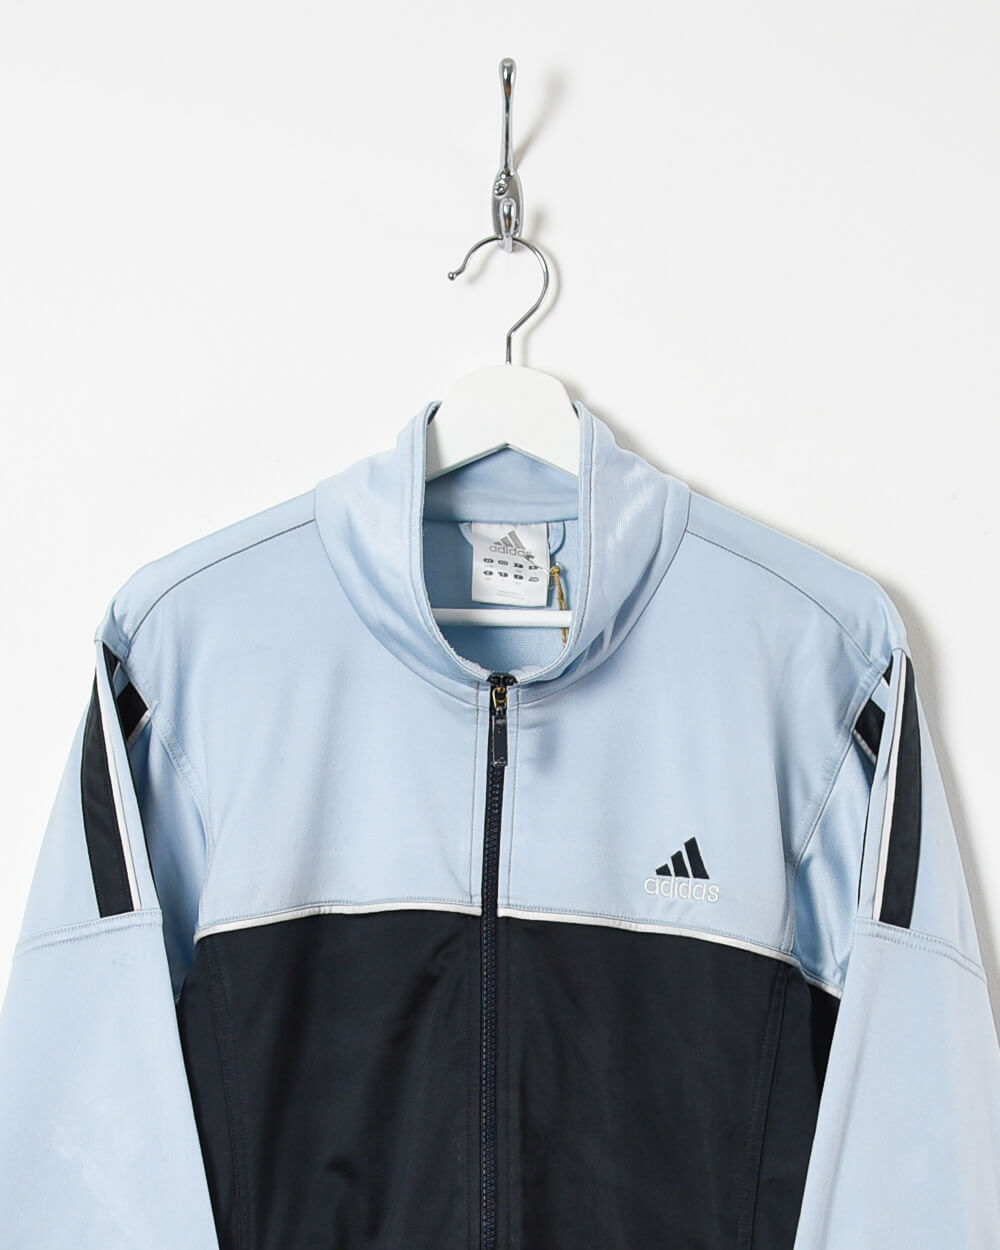 Adidas Tracksuit Top - Large - Domno Vintage 90s, 80s, 00s Retro and Vintage Clothing 